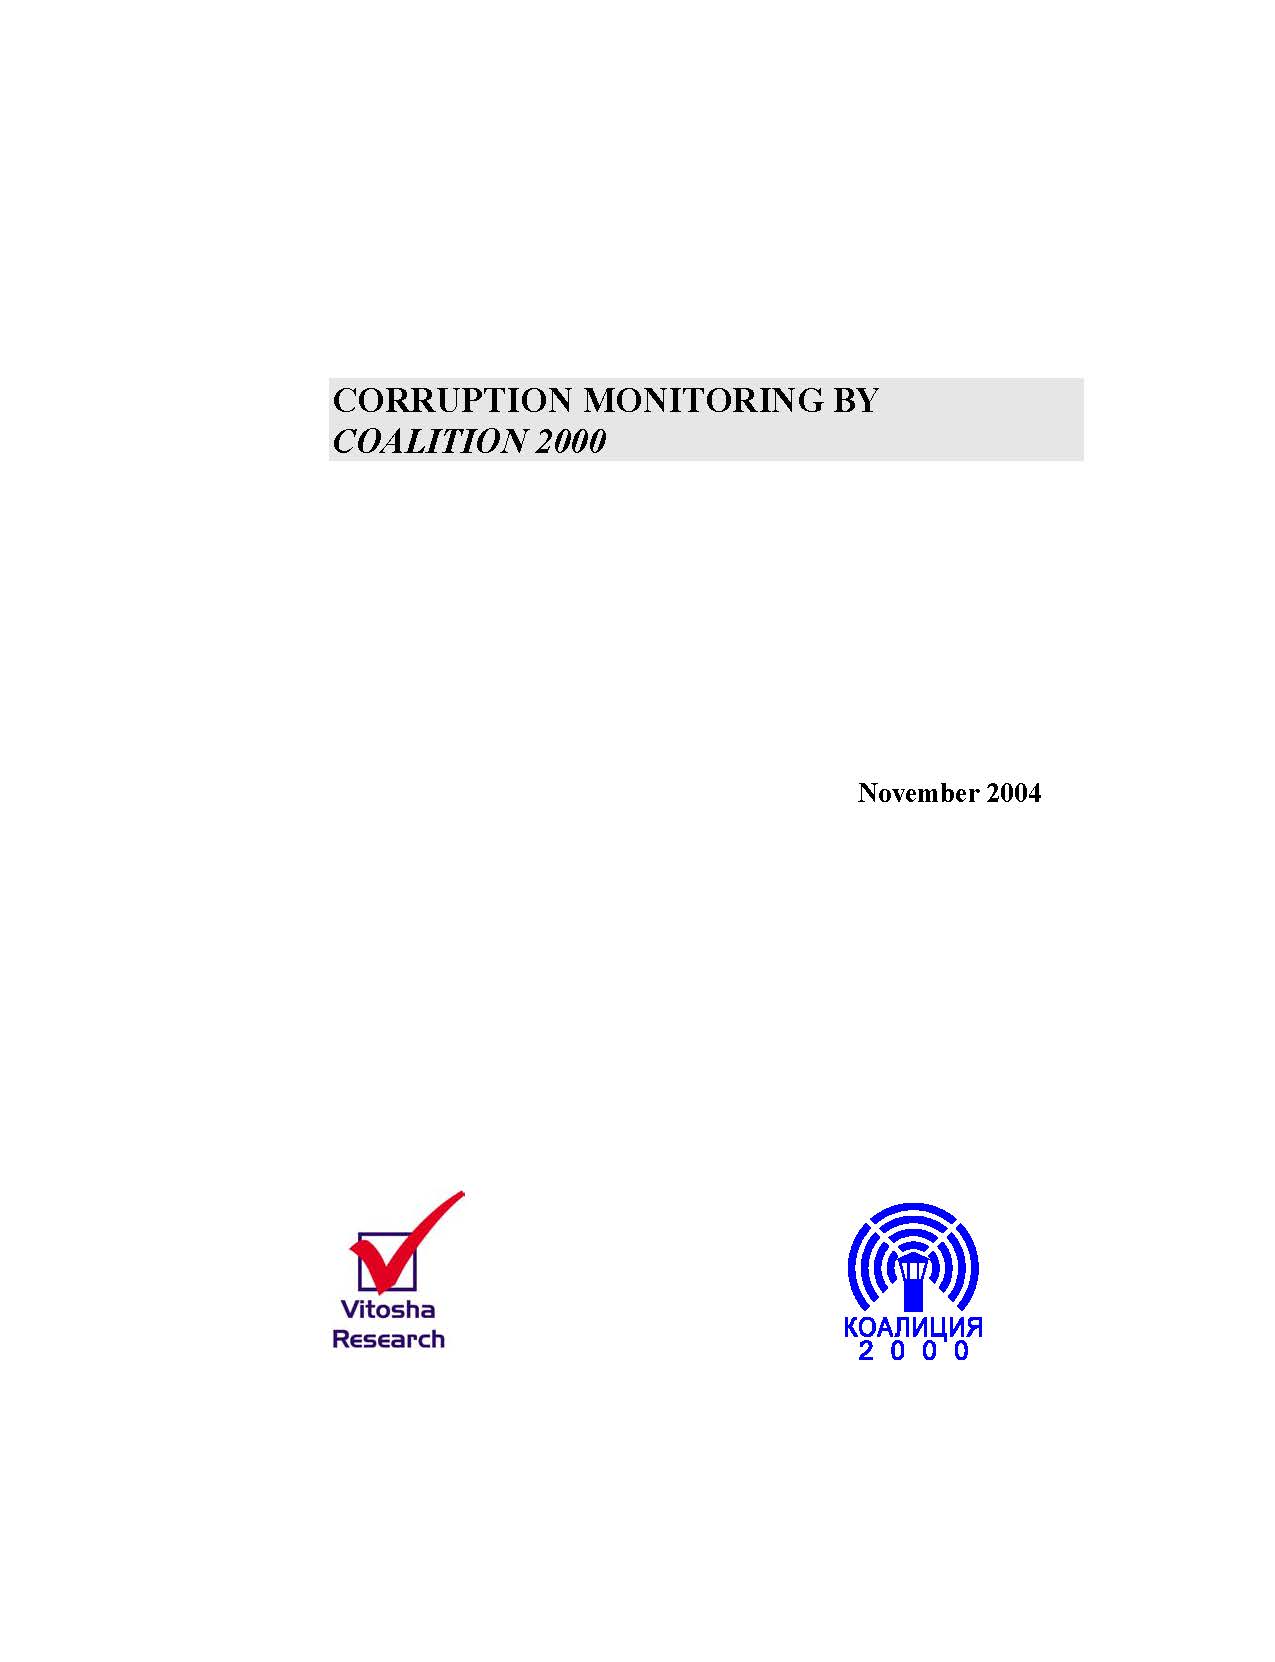 Corruption Indexes of Coalition 2000, November 2004 Cover Image